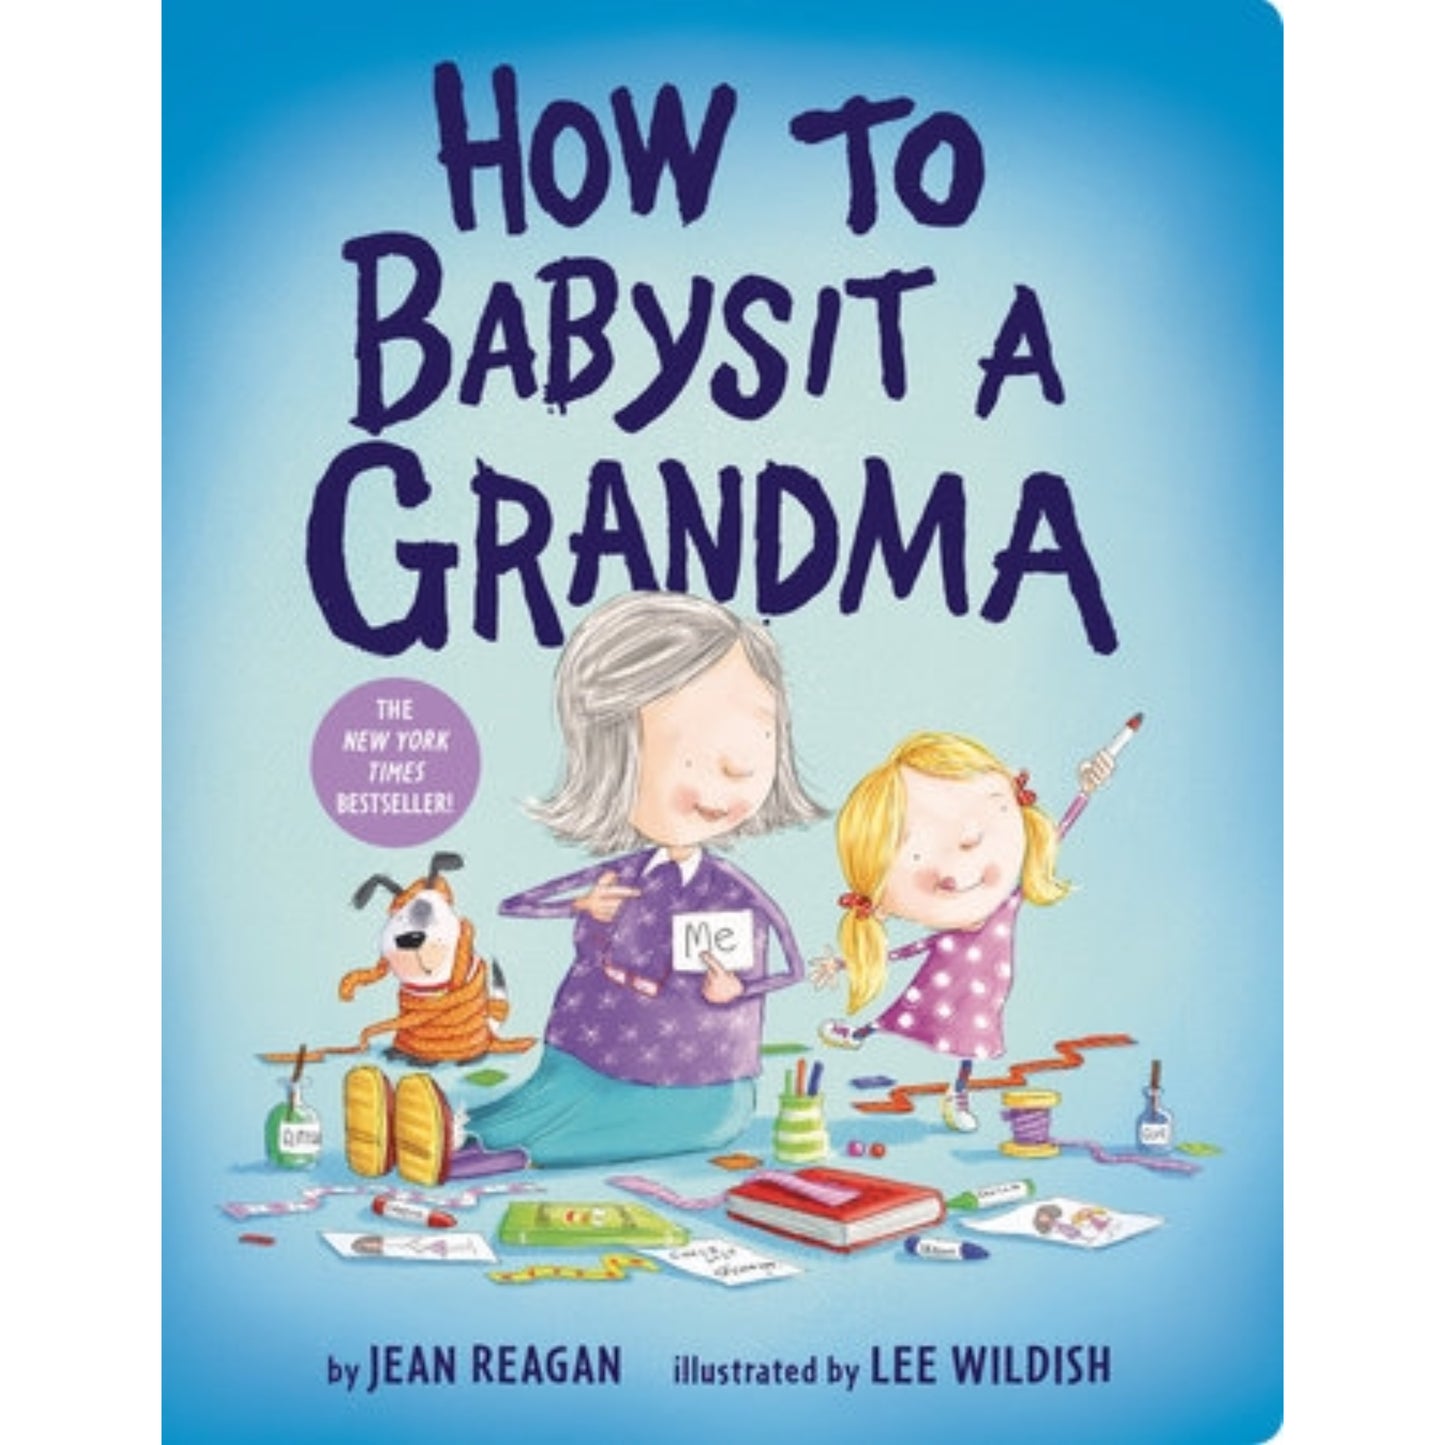 How to Babysit a Grandma Board Book by Jean Reagan